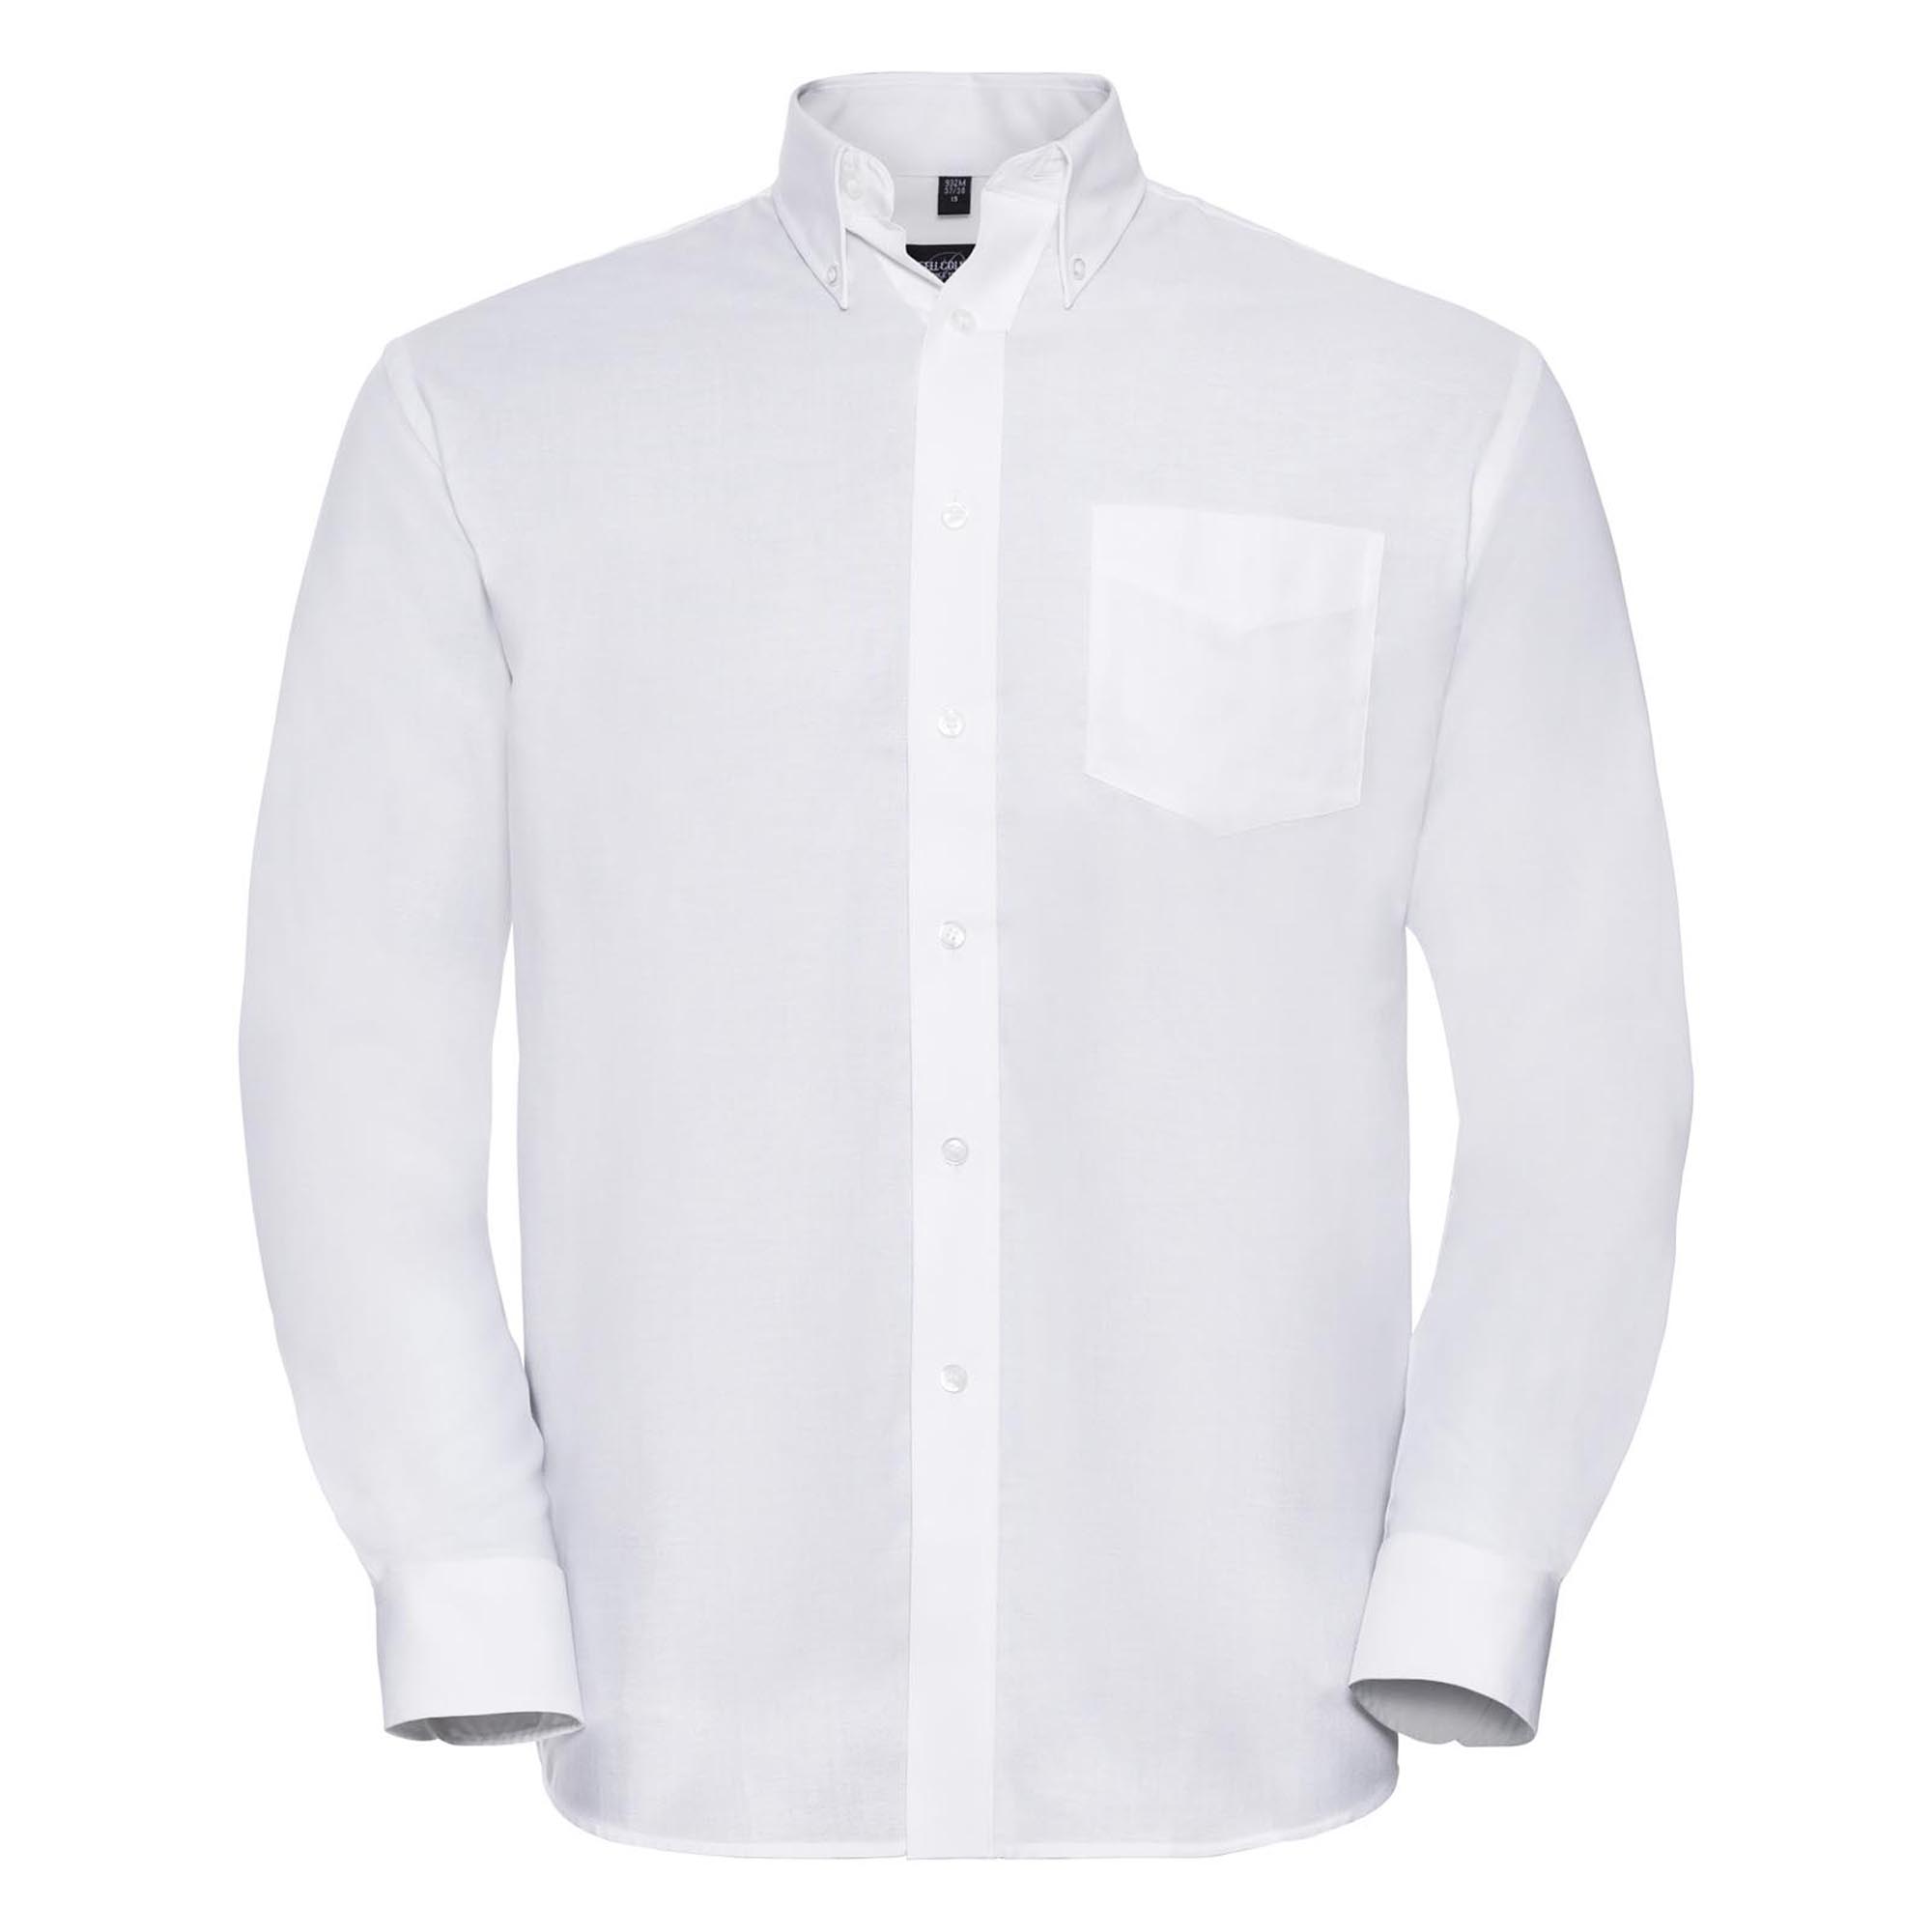 Russell Collection J932M Long sleeve Easycare Oxford shirt Blank Plain ...